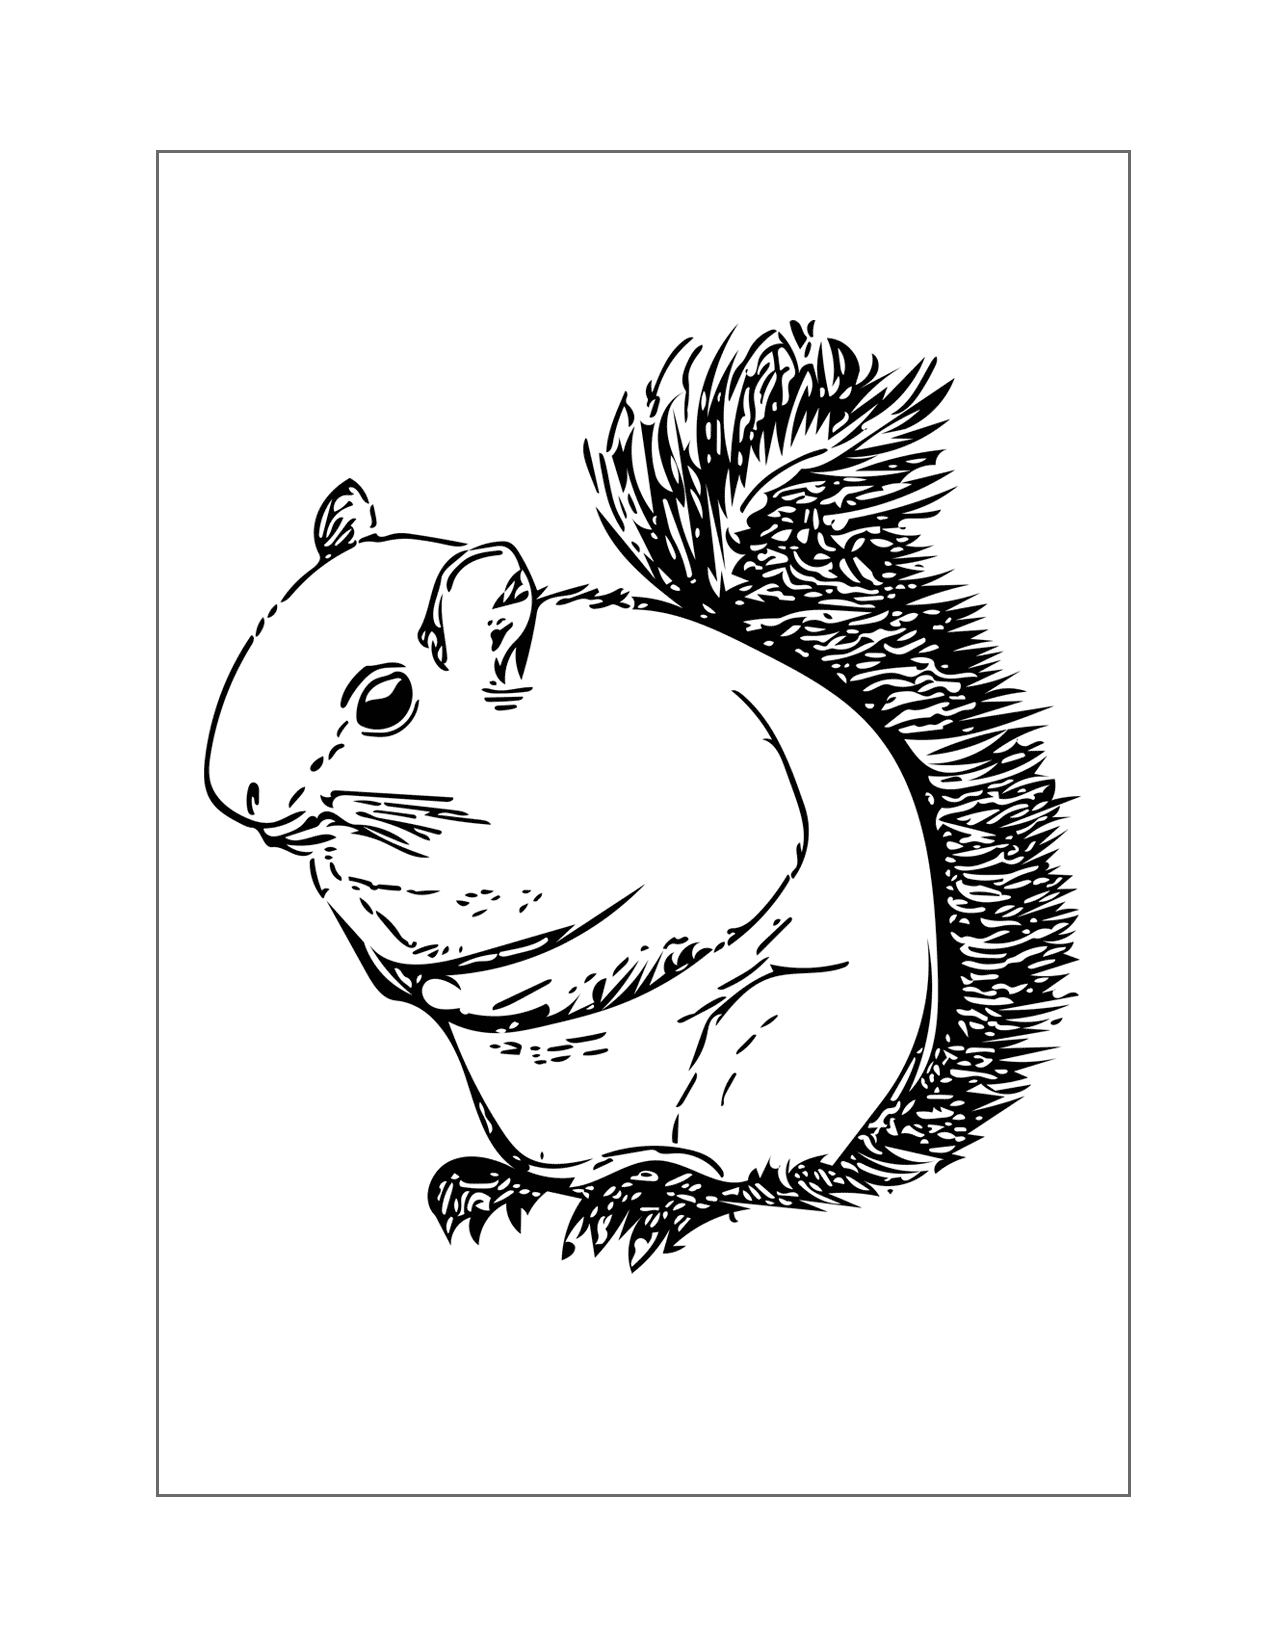 Squirrel With Fuzzy Tail Coloring Page